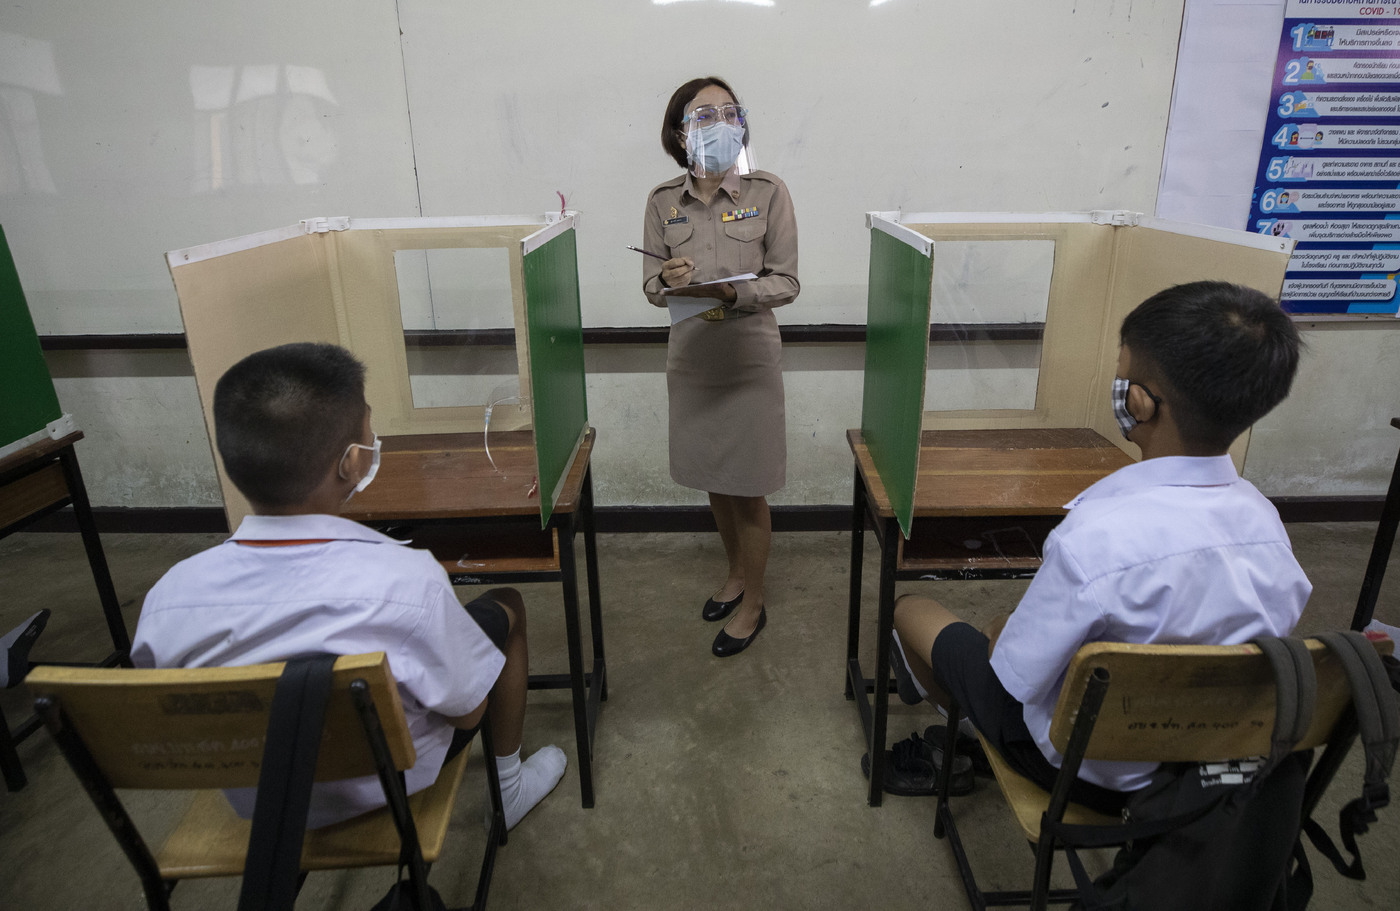 A teacher in protective gear teaches her students, seated at partitioned desks at the Samkhok School in Pathum Thani, outside Bangkok, Wednesday, July 1, 2020. Thailand has begun a fifth phase of relaxations of COVID-19 restrictions, allowing the reopening of schools and high-risk entertainment venues such as pubs and massage parlors that had been shut since mid-March. (AP Photo/Sakchai Lalit)